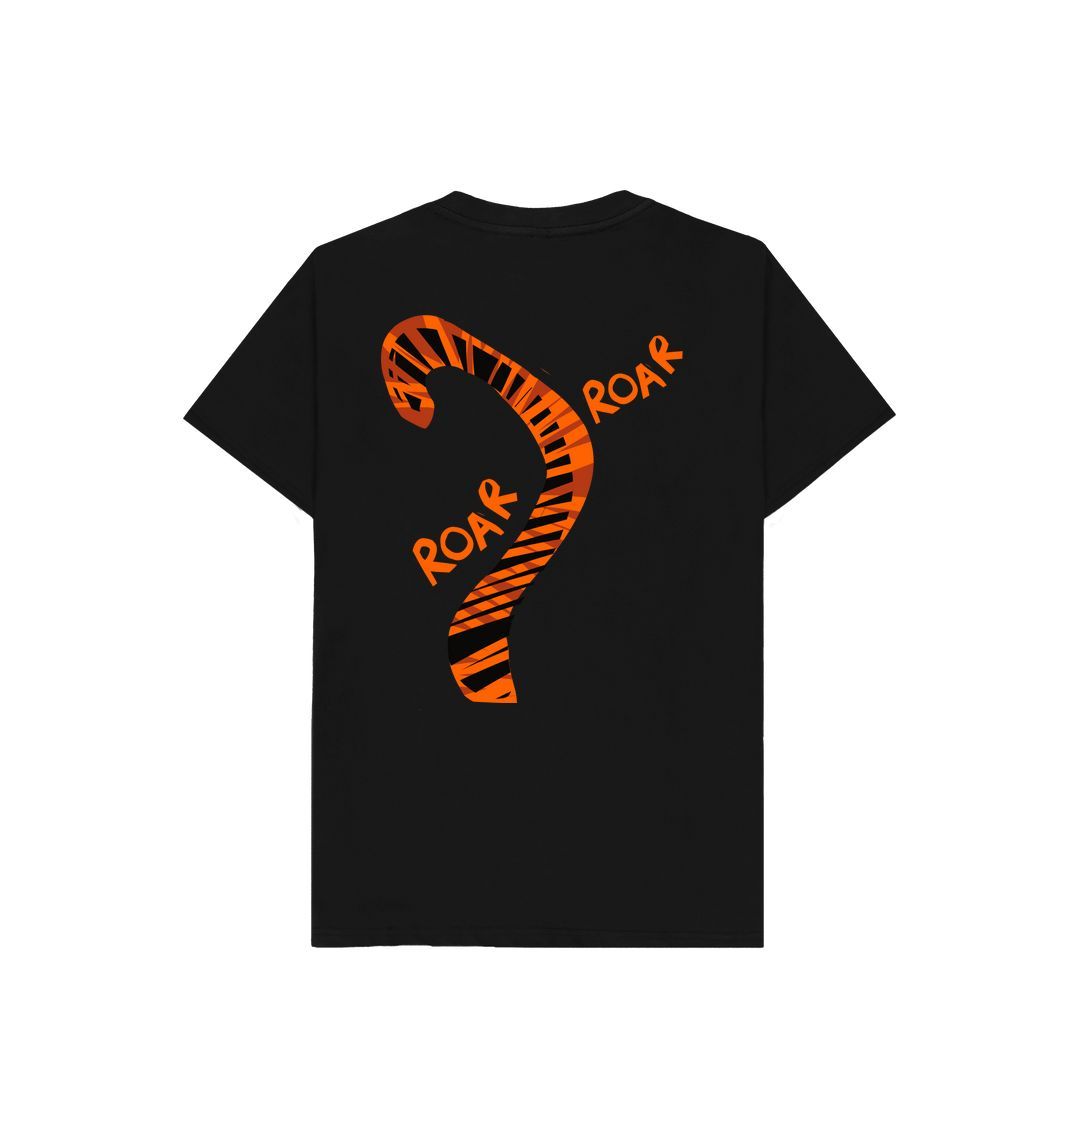 Black TIGER KIDS T -WITH TAIL!